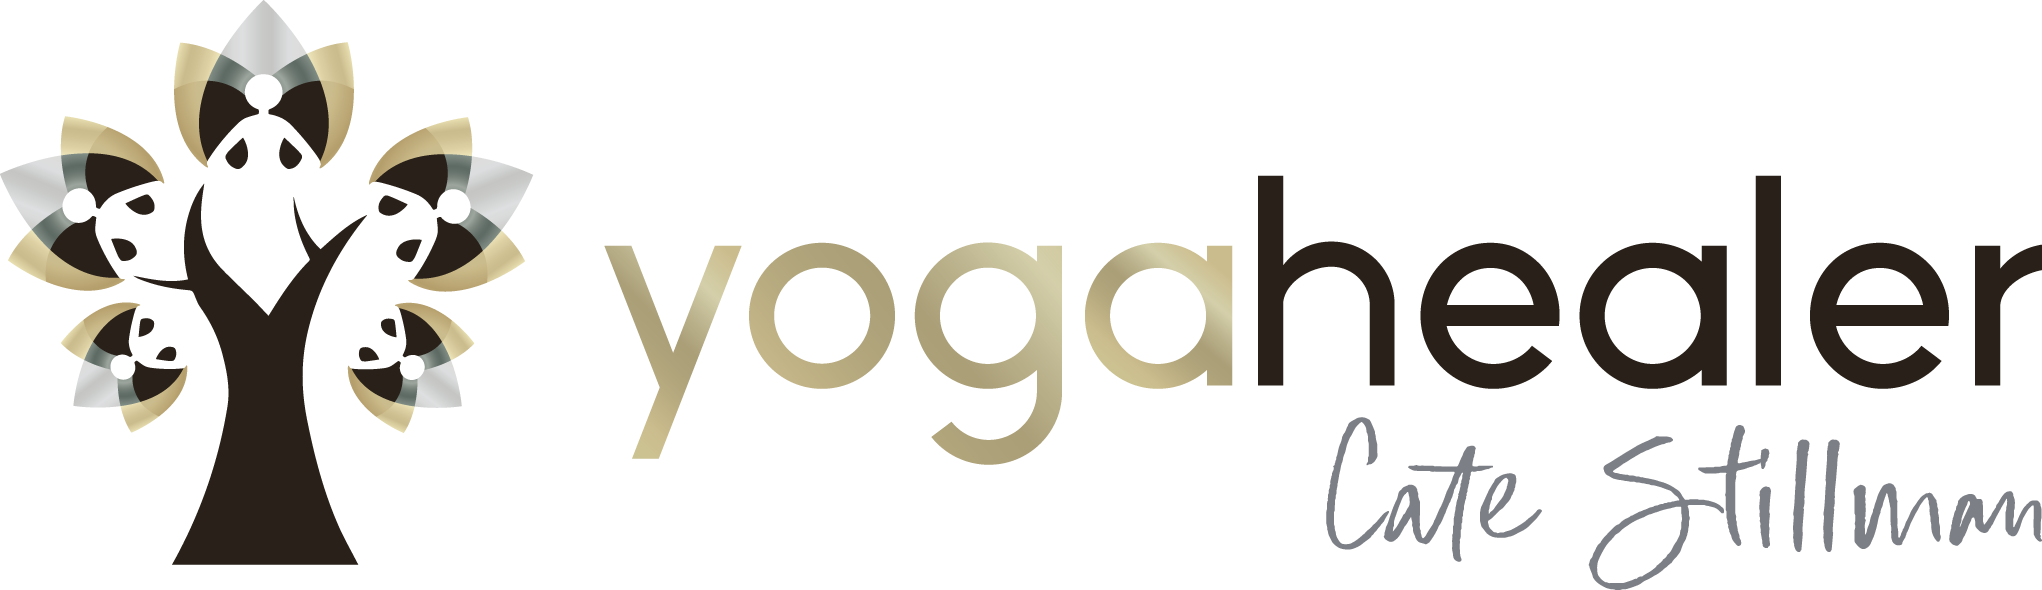 YogaHealer: Ancient Ayurvedic Superfoods For Biohackers, Ultra Athletes And Yogis With Joel Einhorn